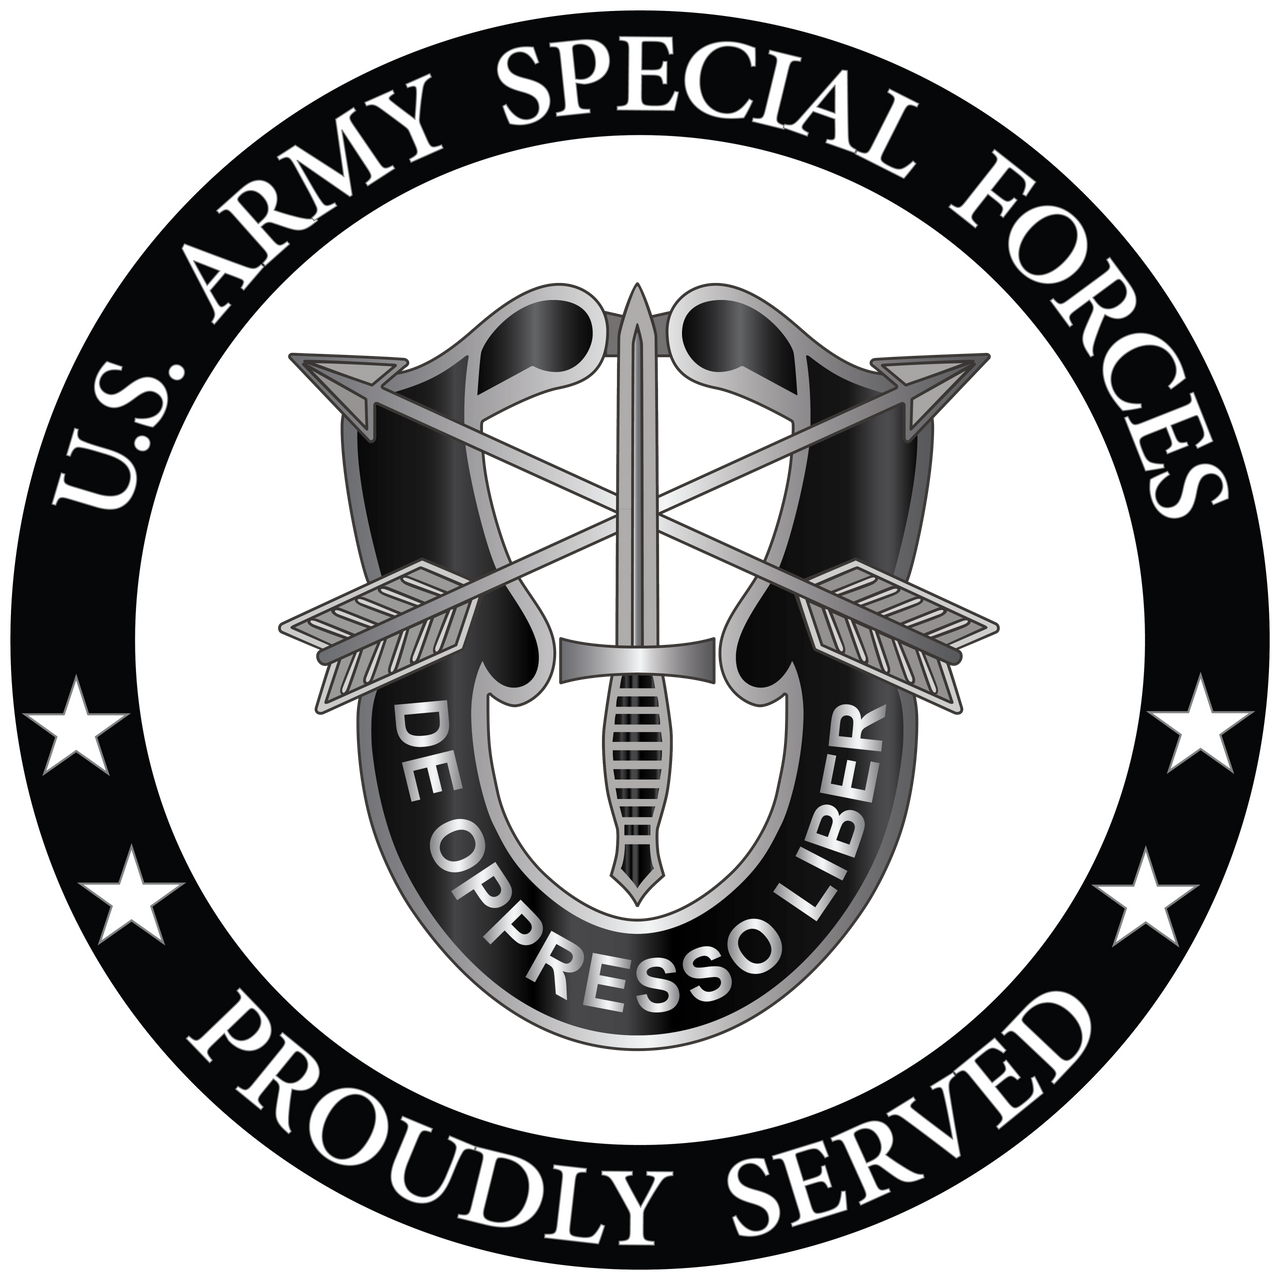 Us Army Special Forces Decals - Army Military